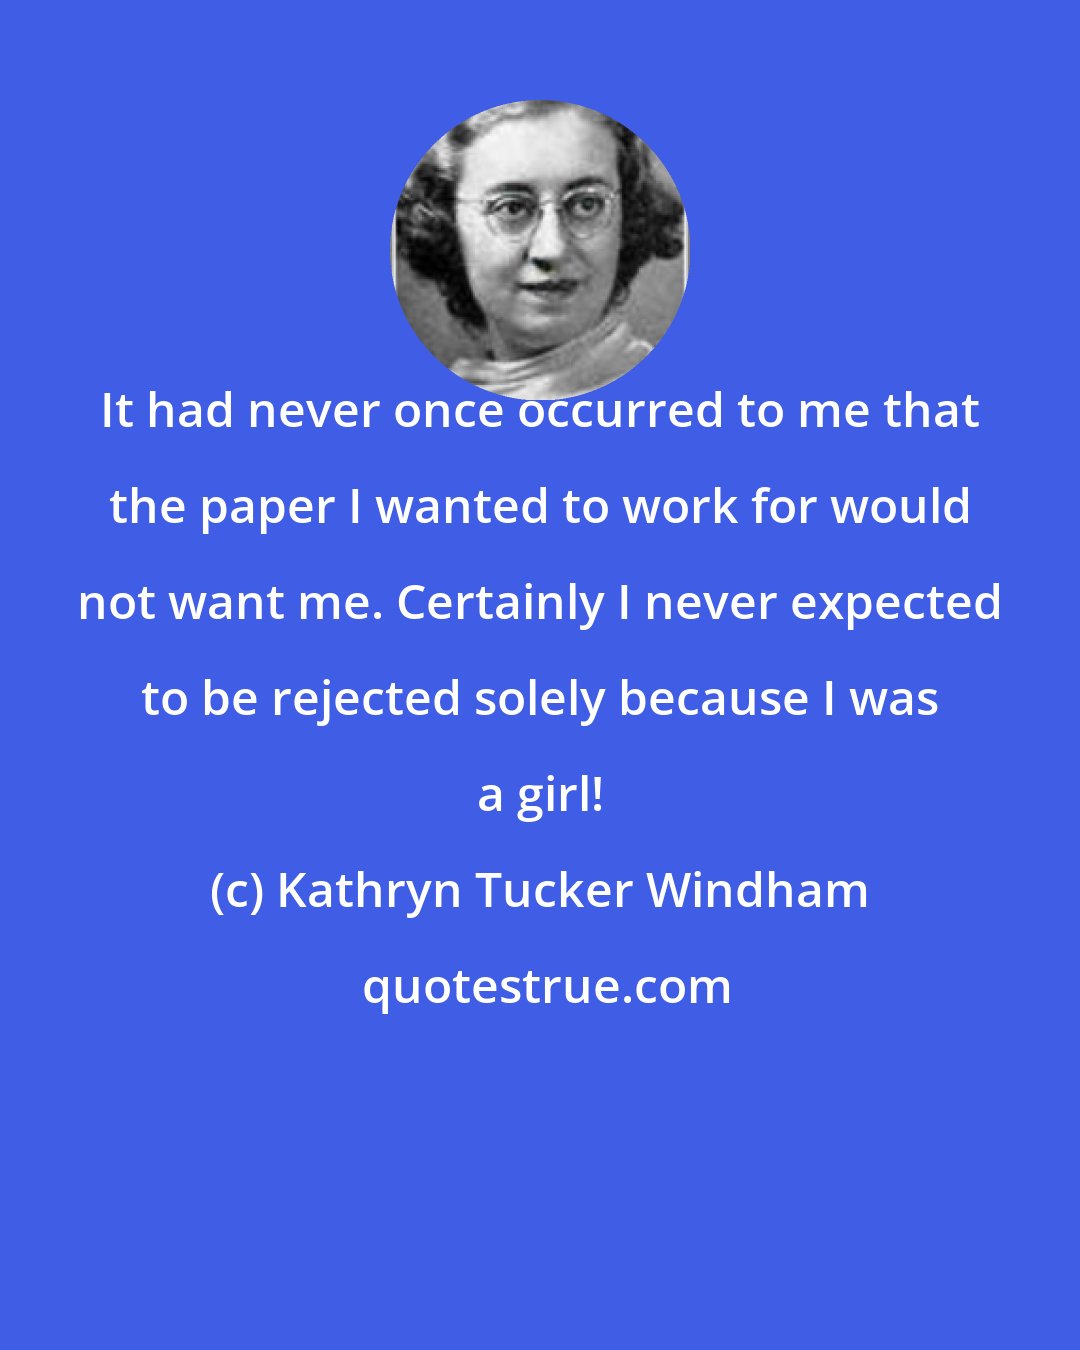 Kathryn Tucker Windham: It had never once occurred to me that the paper I wanted to work for would not want me. Certainly I never expected to be rejected solely because I was a girl!